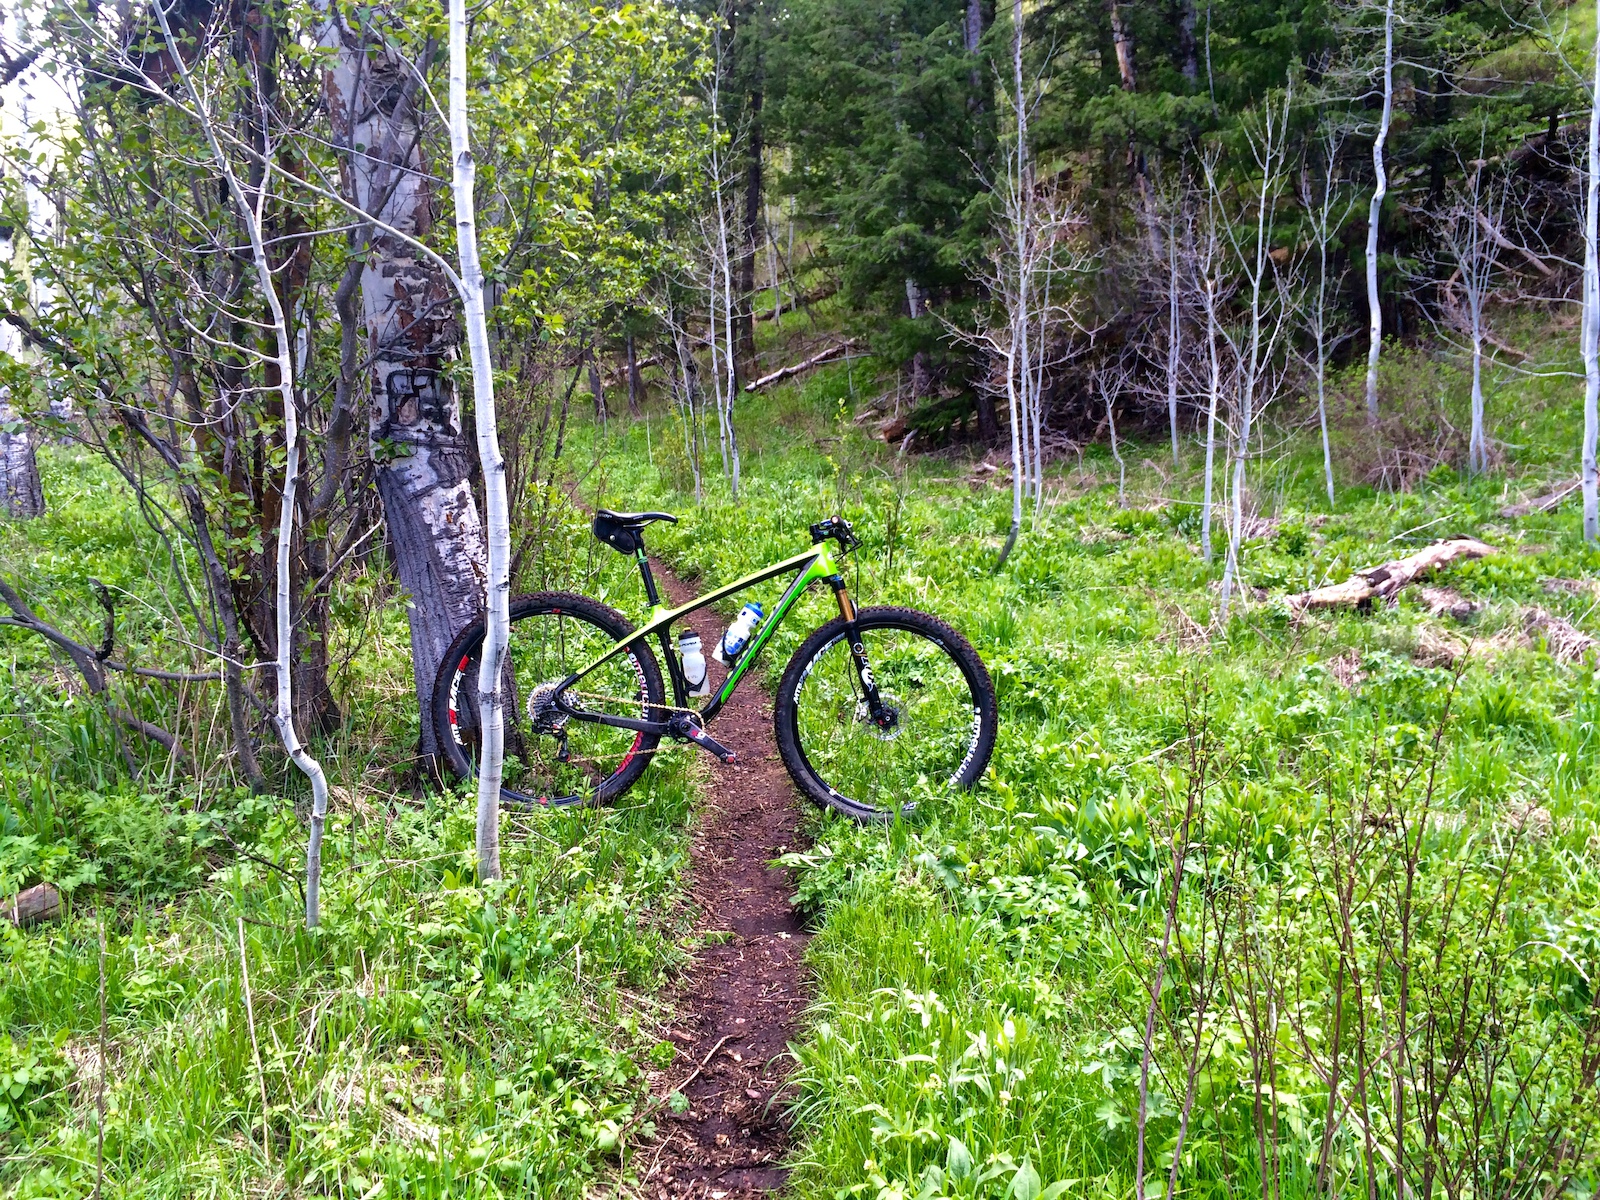 When the overgrowth isn't taking over the trail it is a real gem